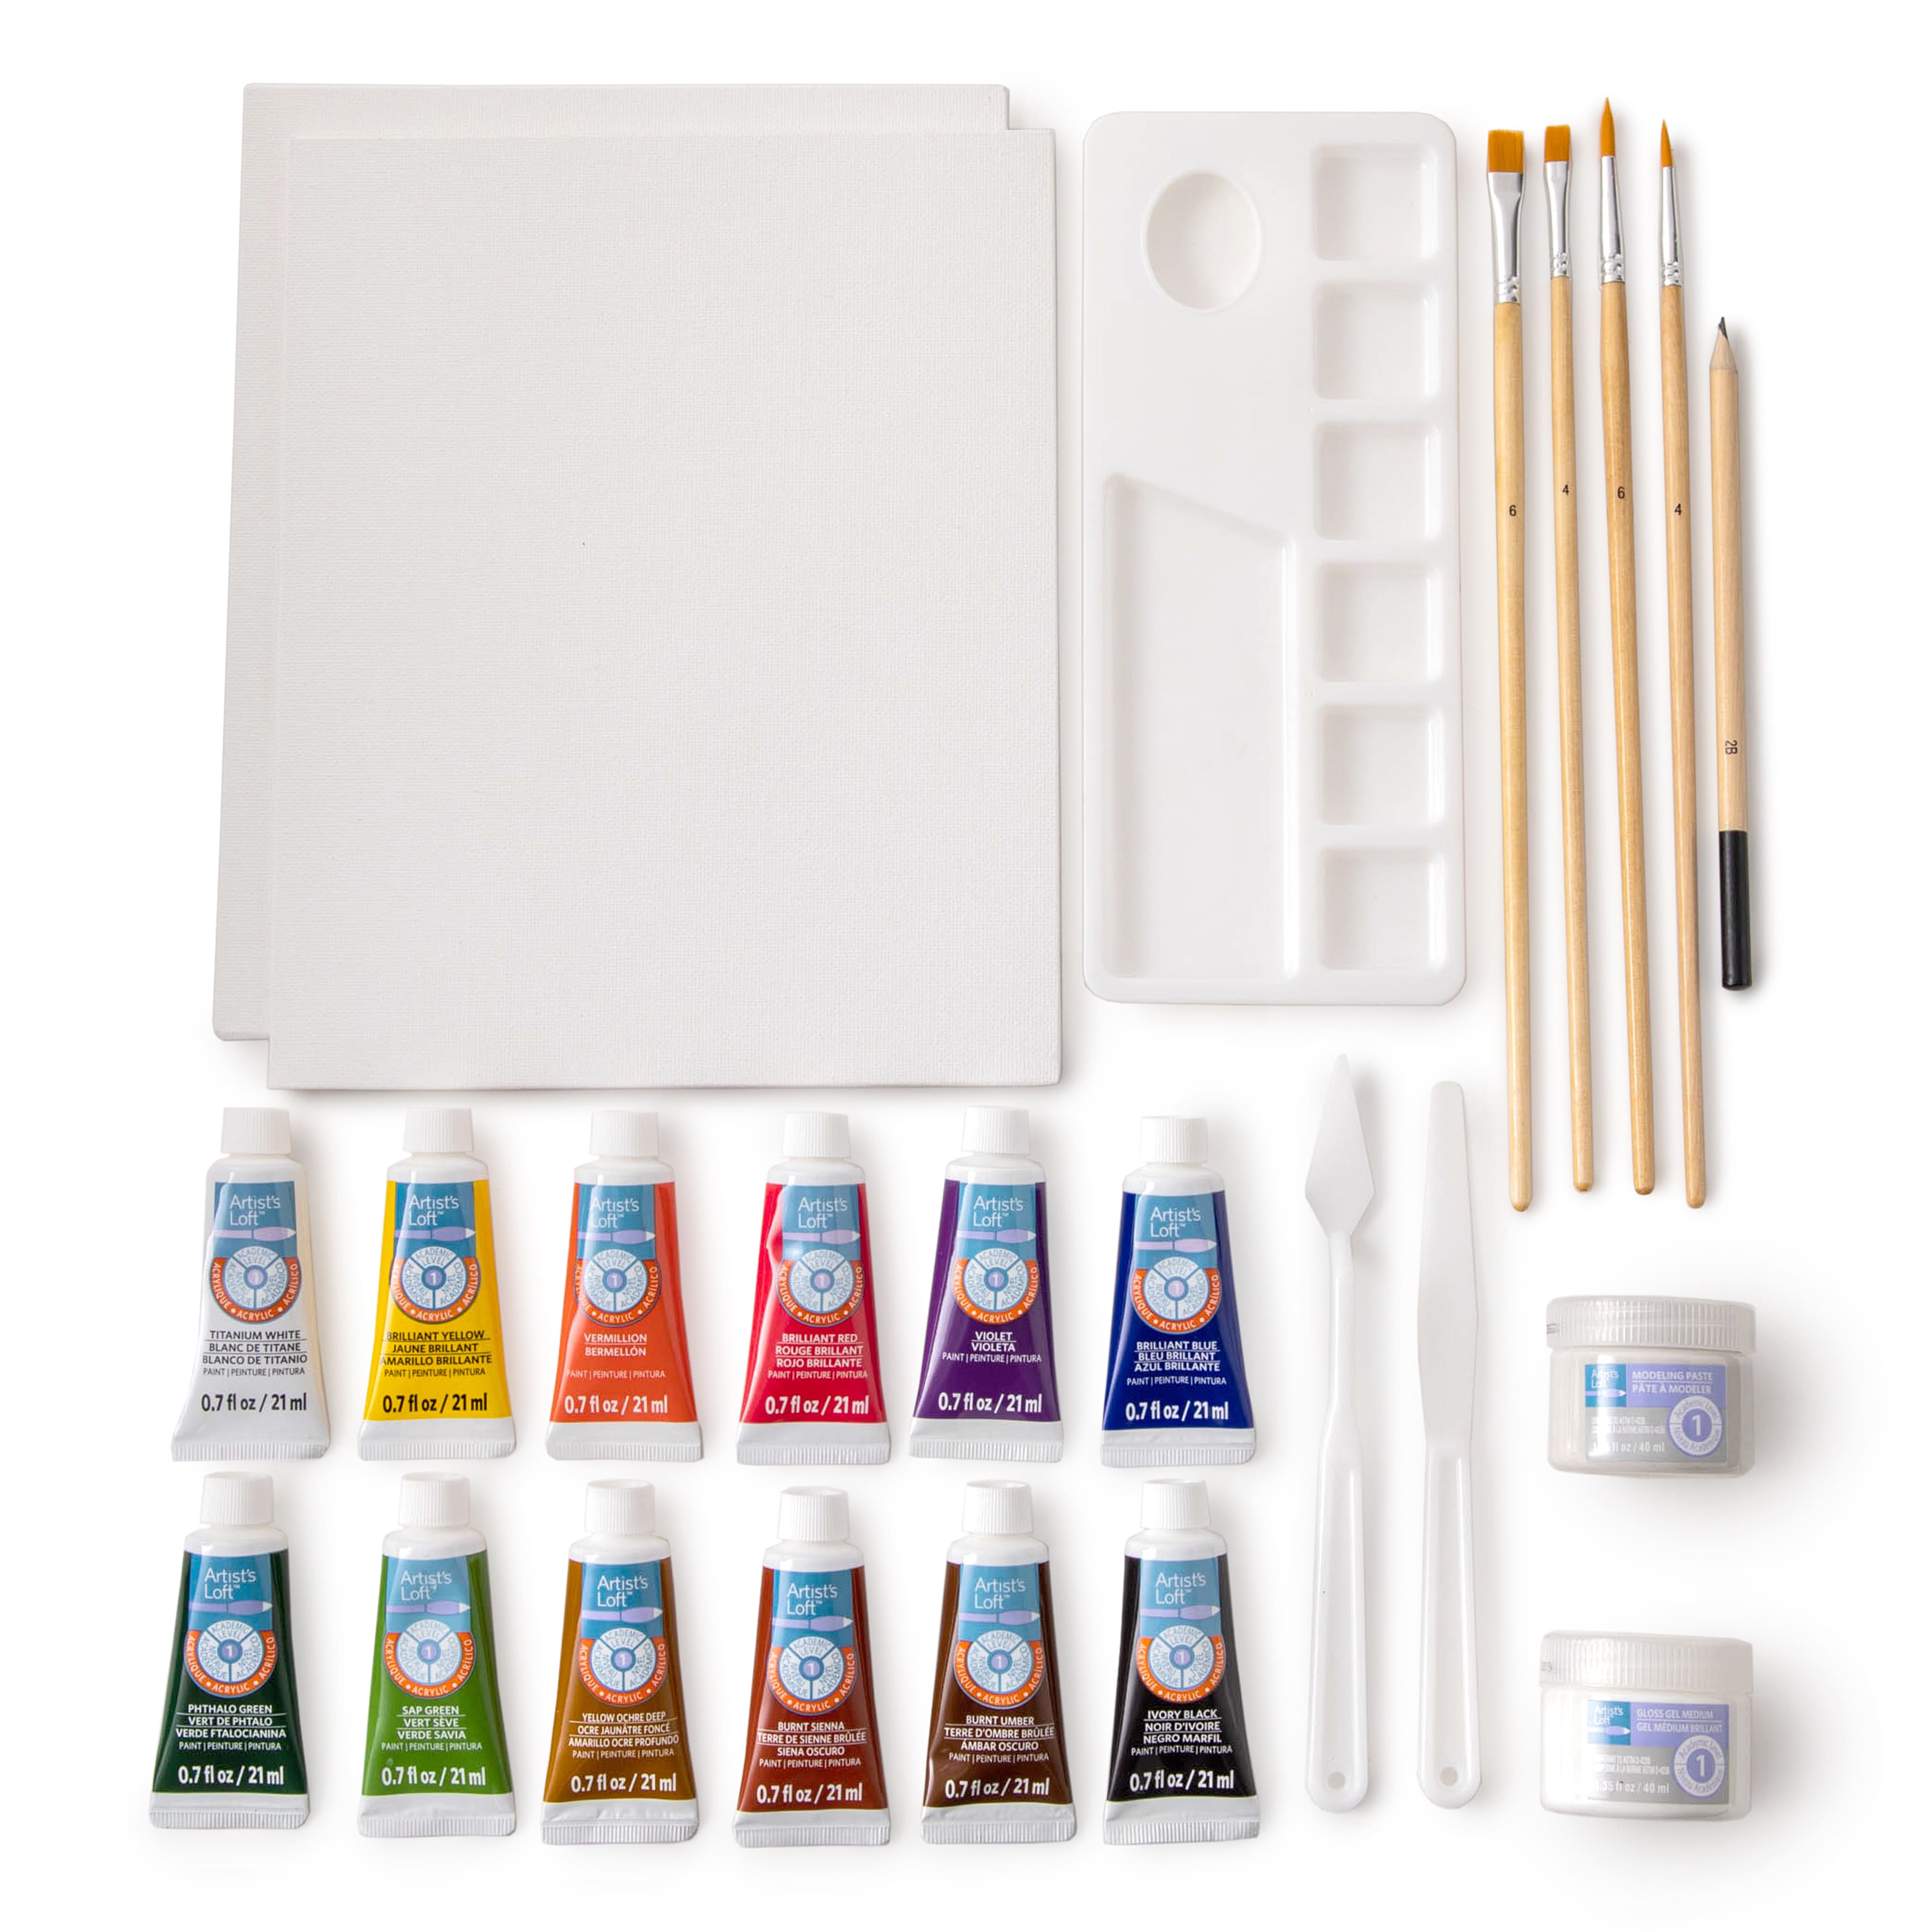 8 Pack: Level 1 Complete Acrylic Painting Set by Artist's Loft™